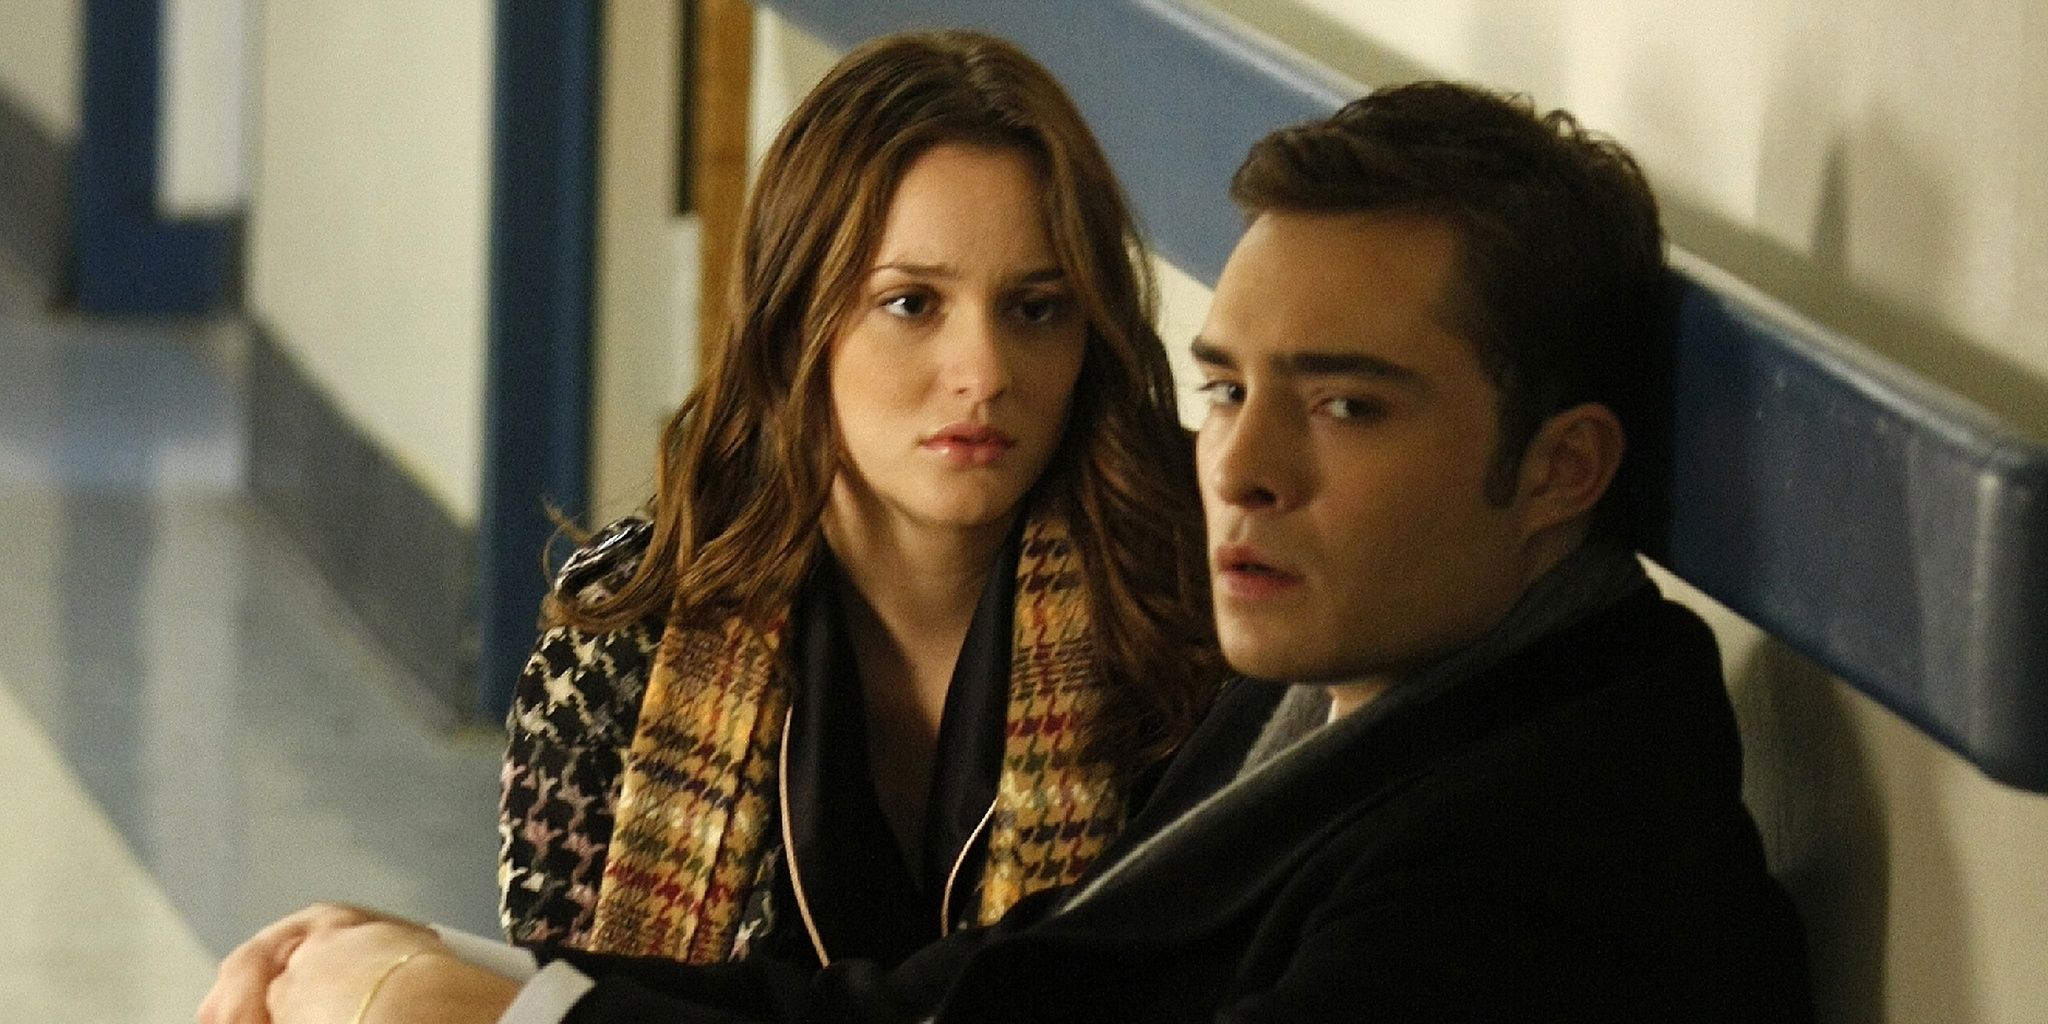 Gossip Girl 2021: Every Original Show Easter Egg & Reference In